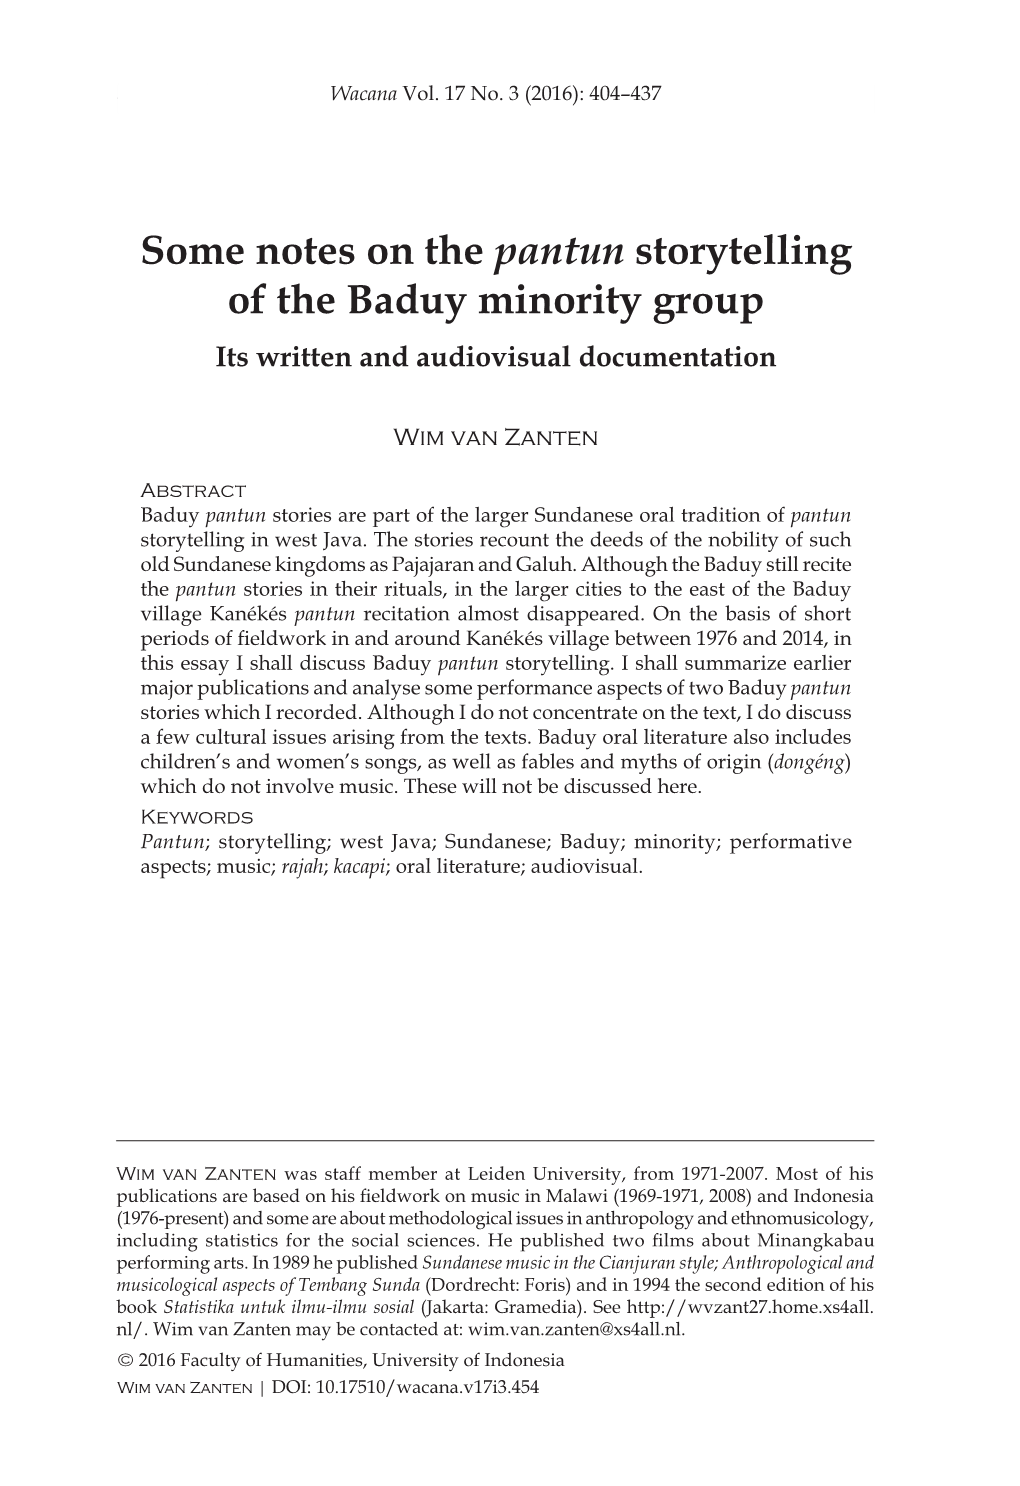 Some Notes on the Pantun Storytelling of the Baduy Minority Group Its Written and Audiovisual Documentation